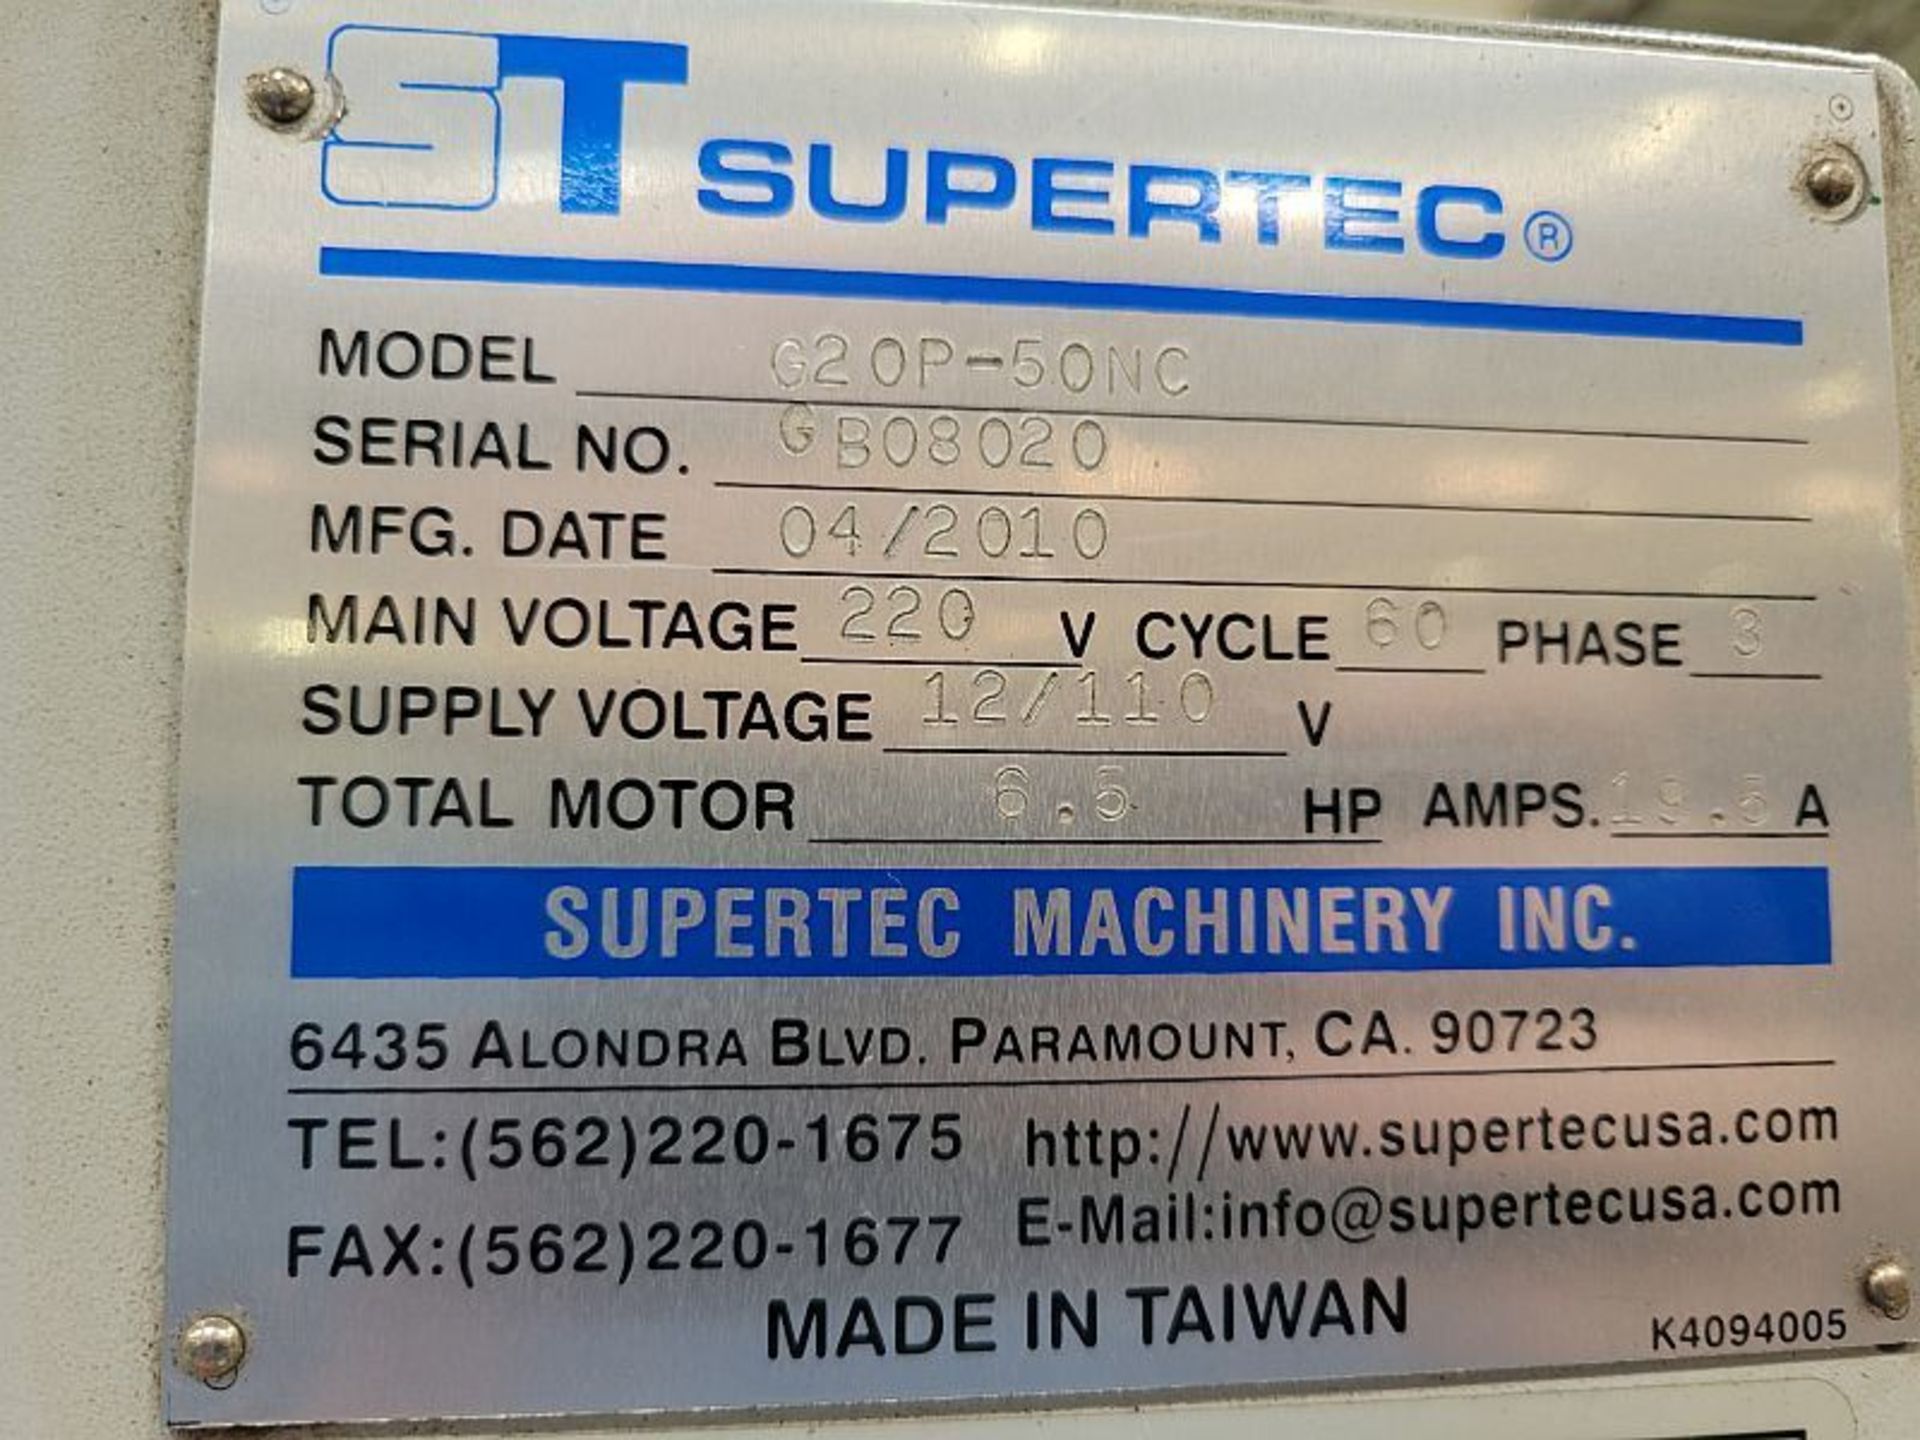 8" x 16" Supertec G20P-50NC Cylindrical Grinder, Touch Screen Control, New 2010 *Off-Site Machine* - Image 4 of 4